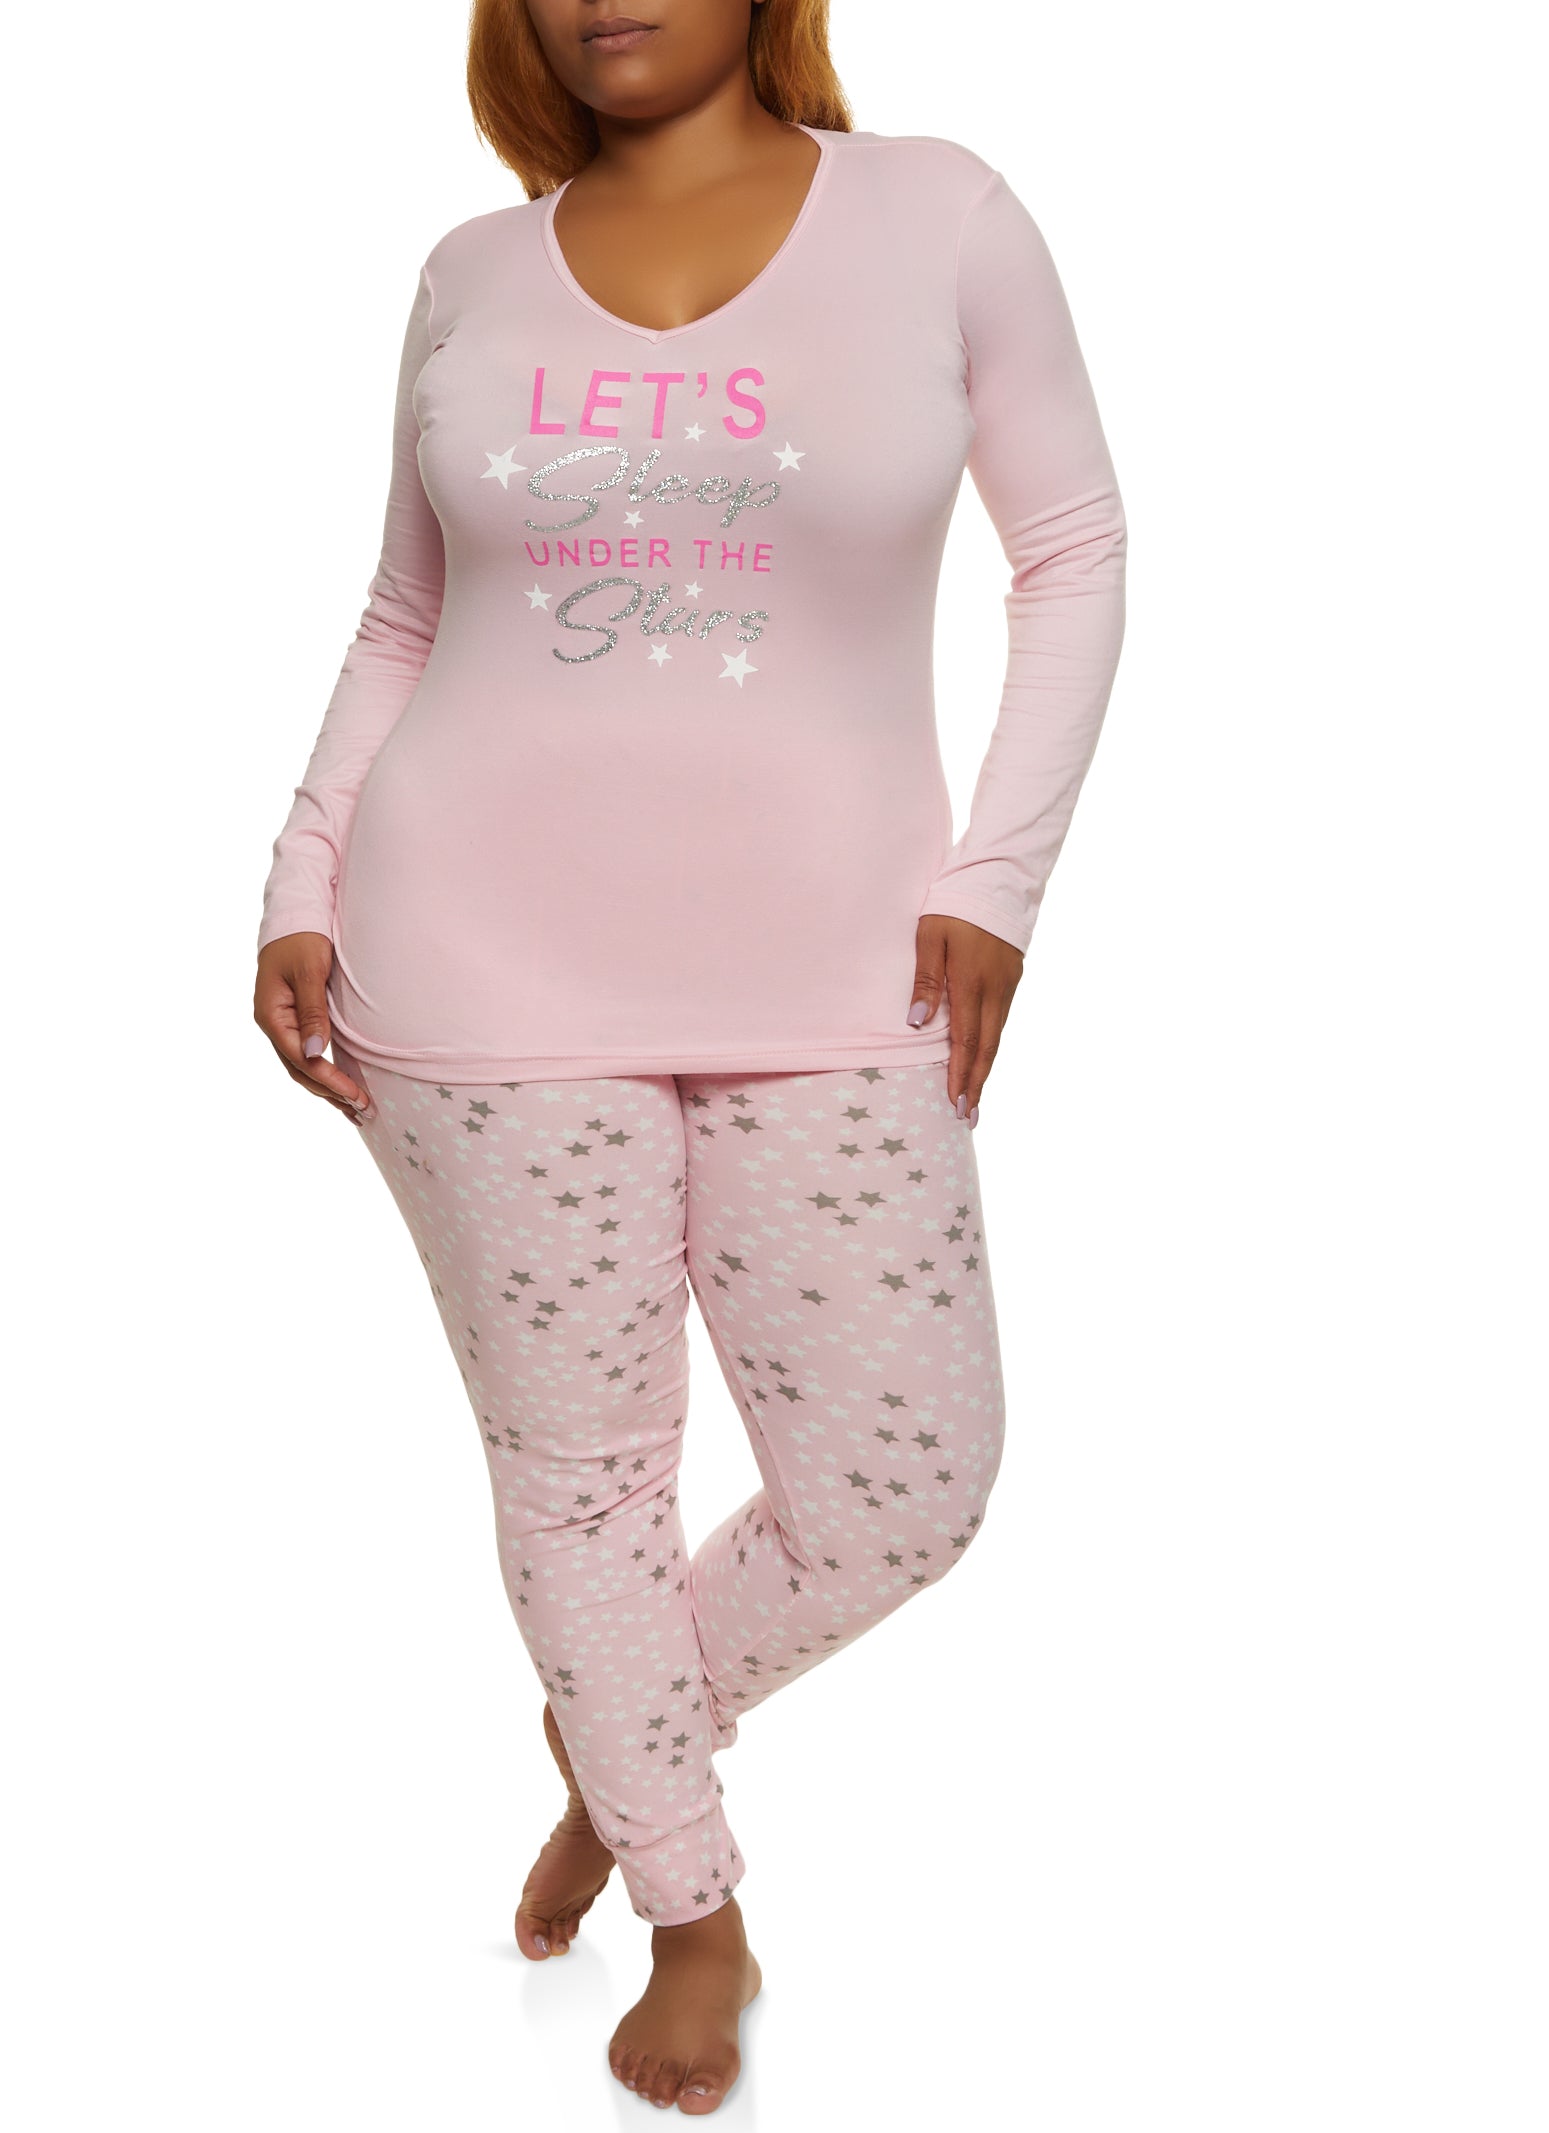 Plus Size Rainbow Pride Lingerie and Pajamas from Cacique - Ready